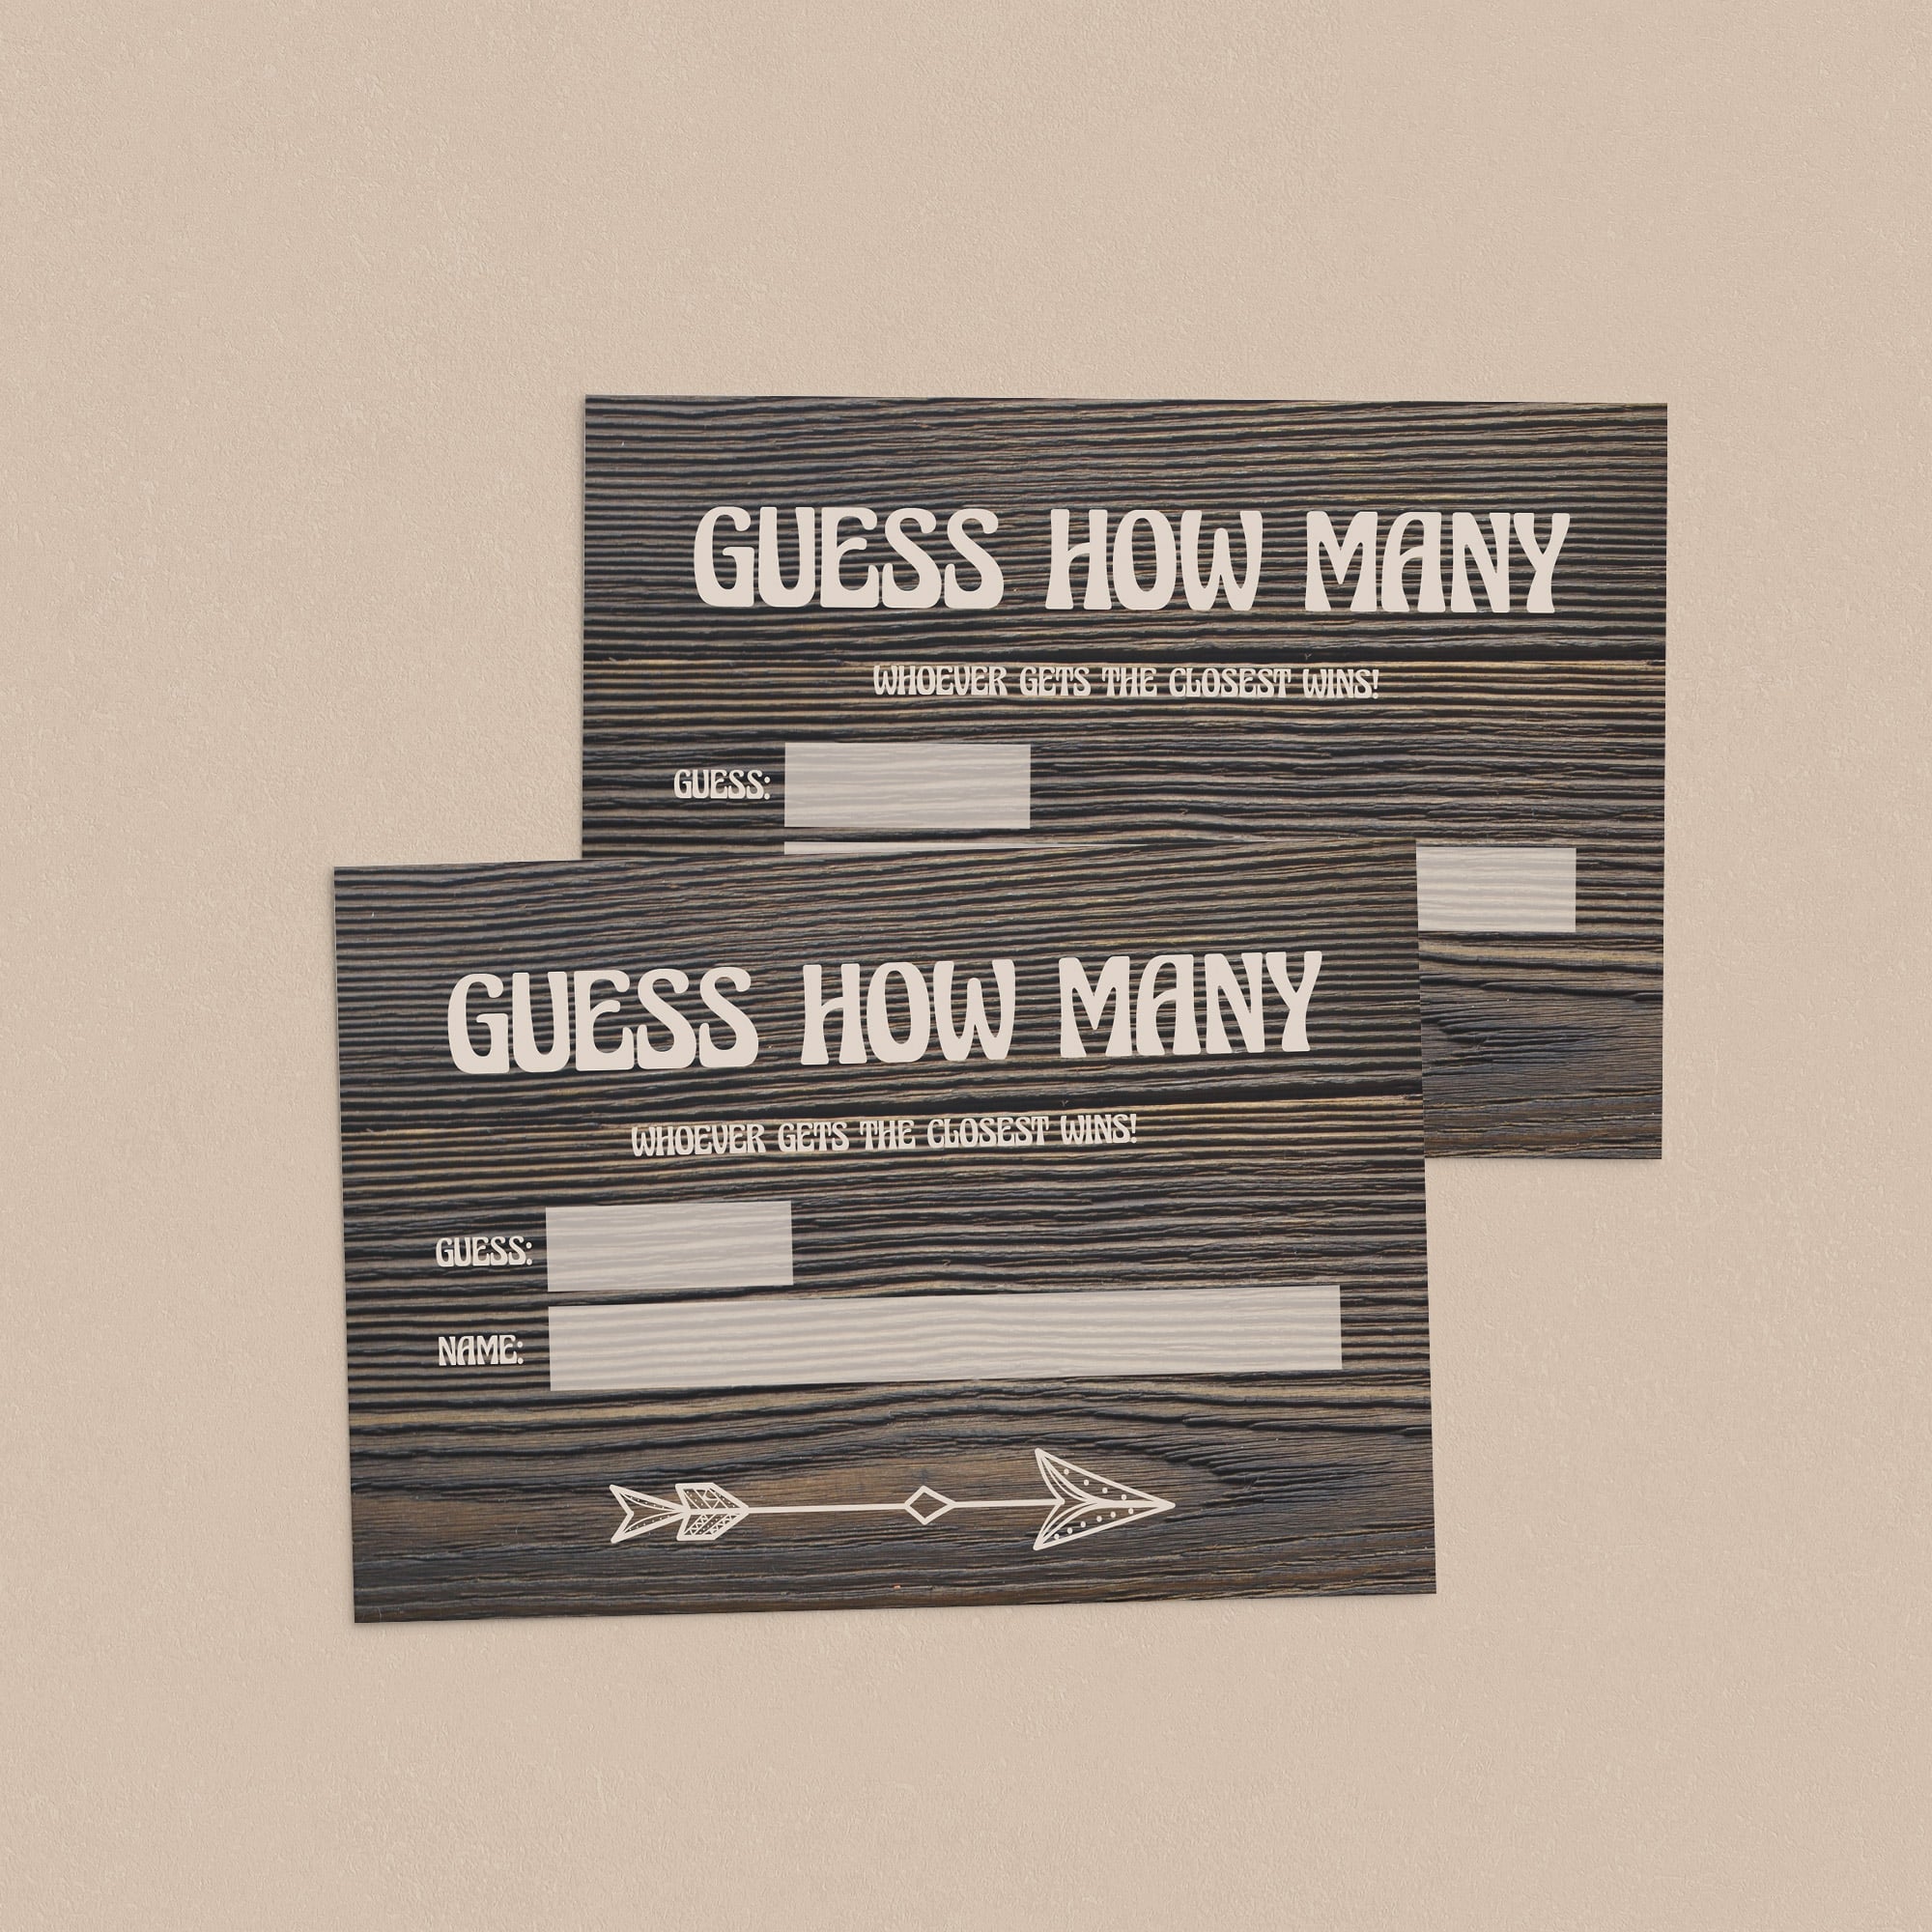 Download guess how many game cards rustic wood look by LittleSizzle